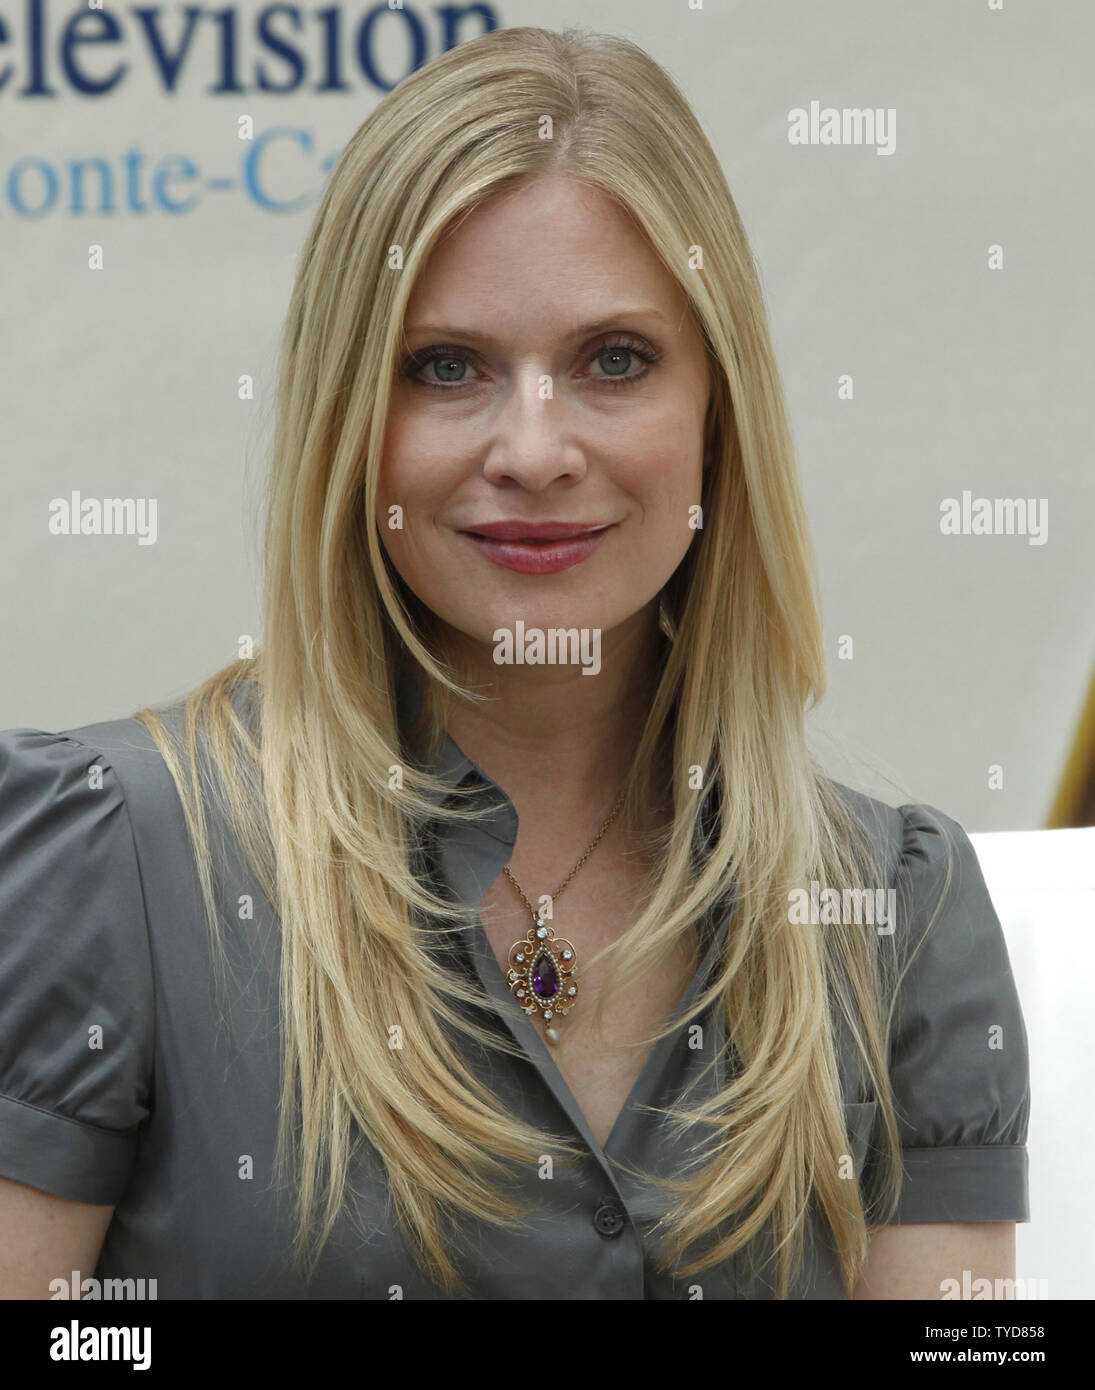 Actress Emily Proctor arrives at a photocall for the television show 'CSI:  Miami' during the 49th Monte Carlo Television Festival in Monte Carlo, Monaco on June 11, 2009.  (UPI Photo/David Silpa) Stock Photo